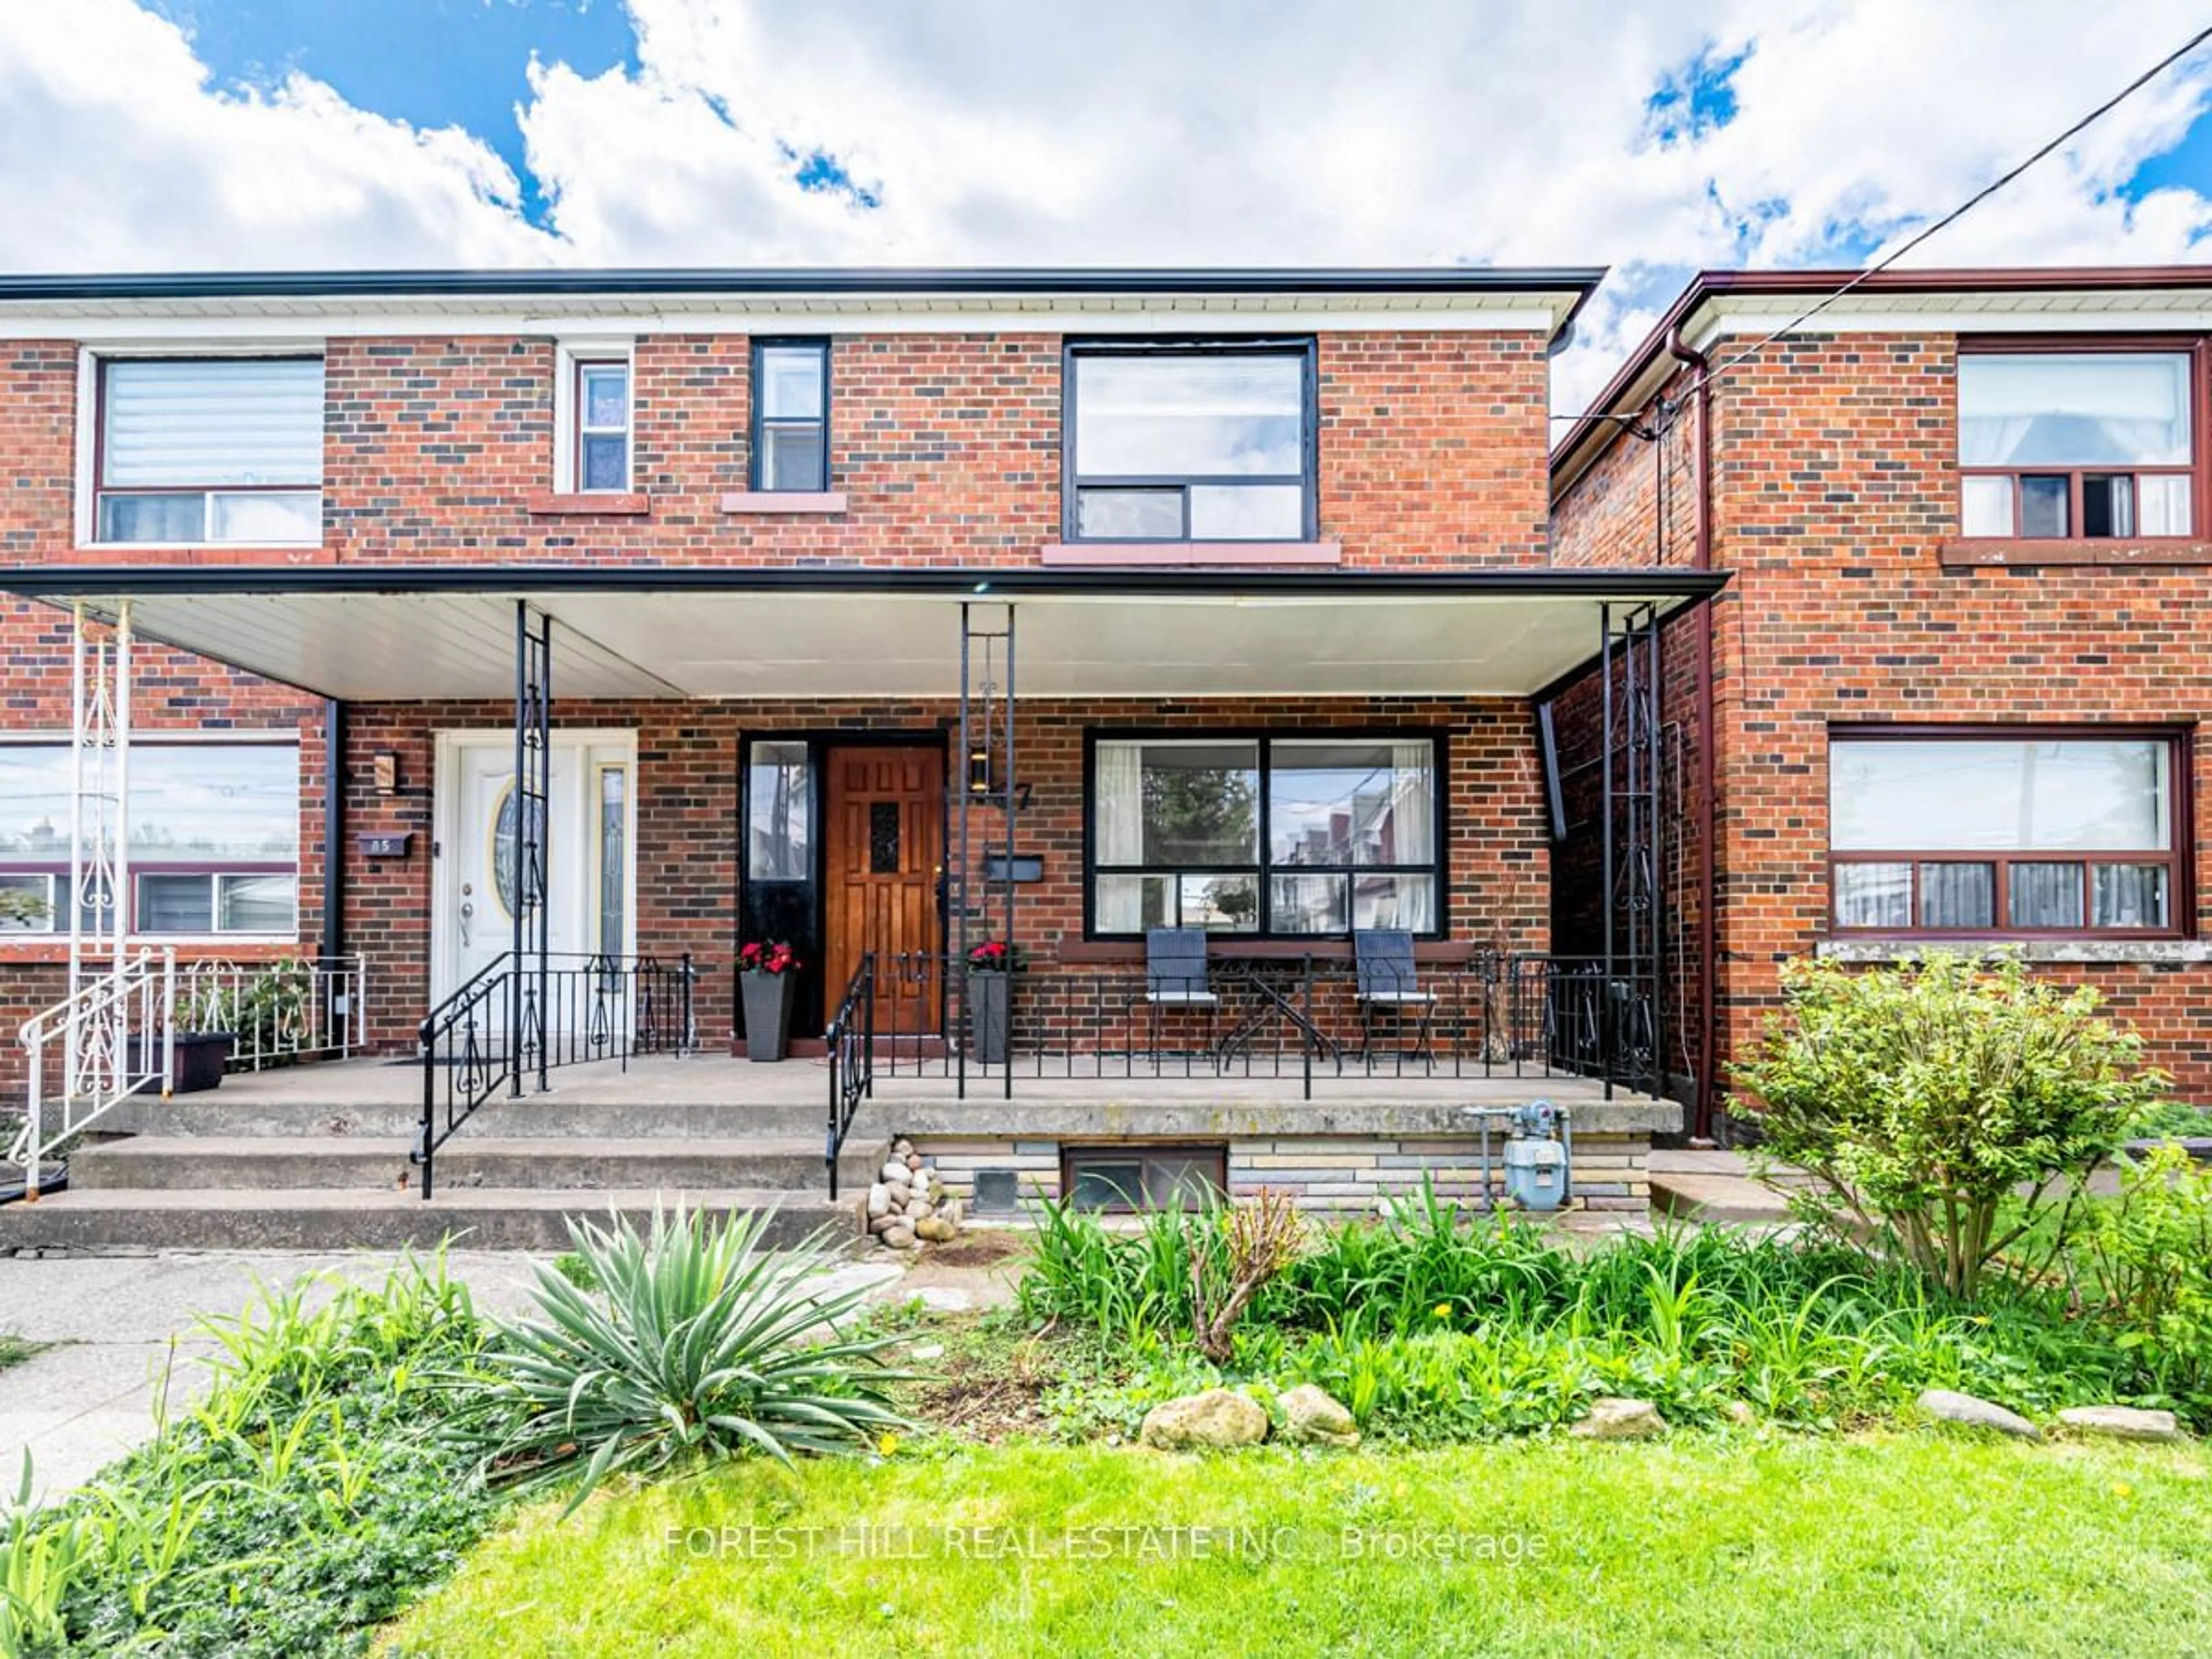 Home with brick exterior material for 87 Henrietta St, Toronto Ontario M6N 1S5